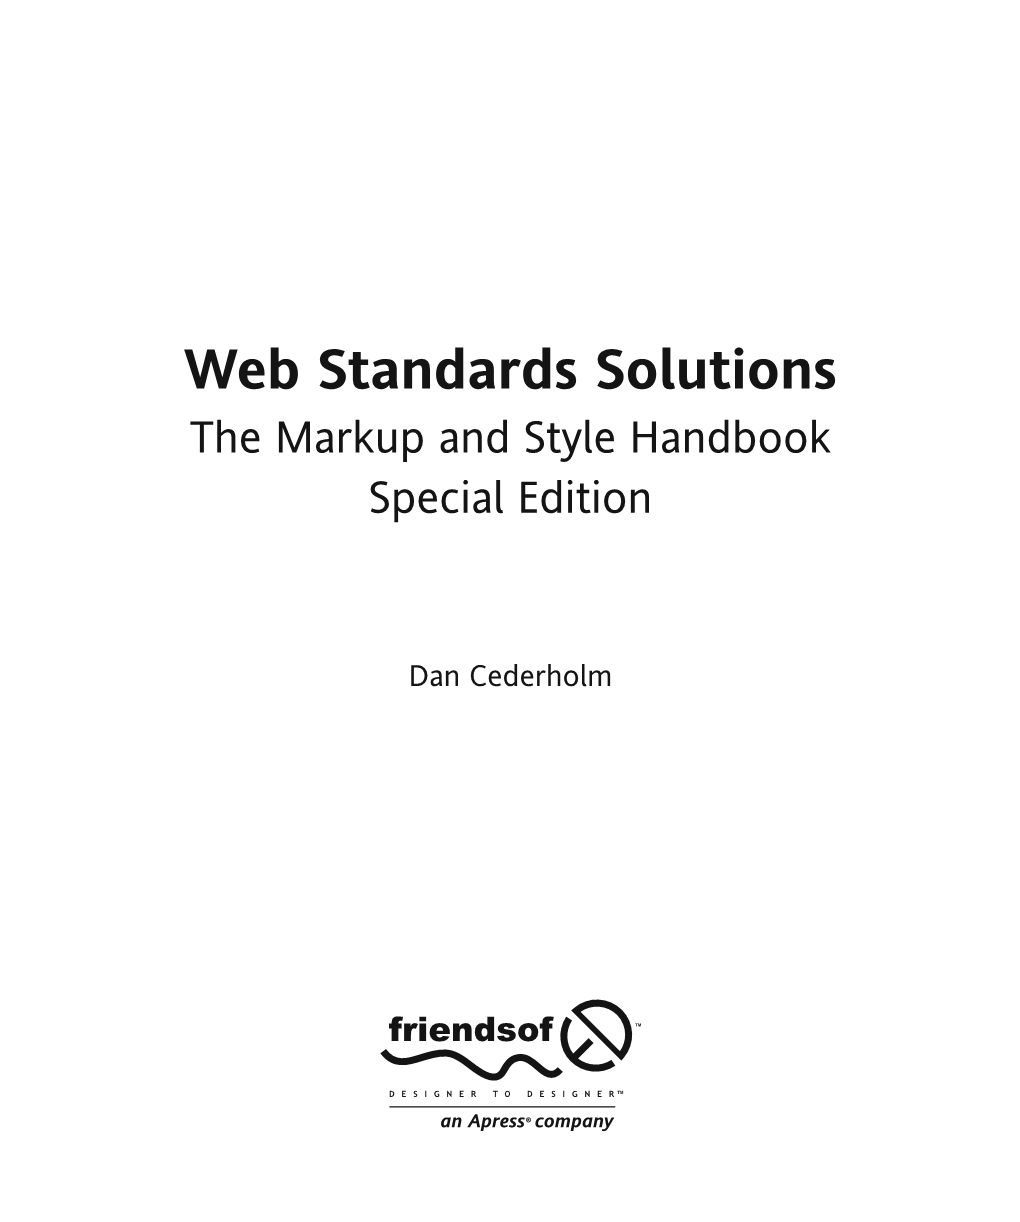 Web Standards Solutions the Markup and Style Handbook Special Edition